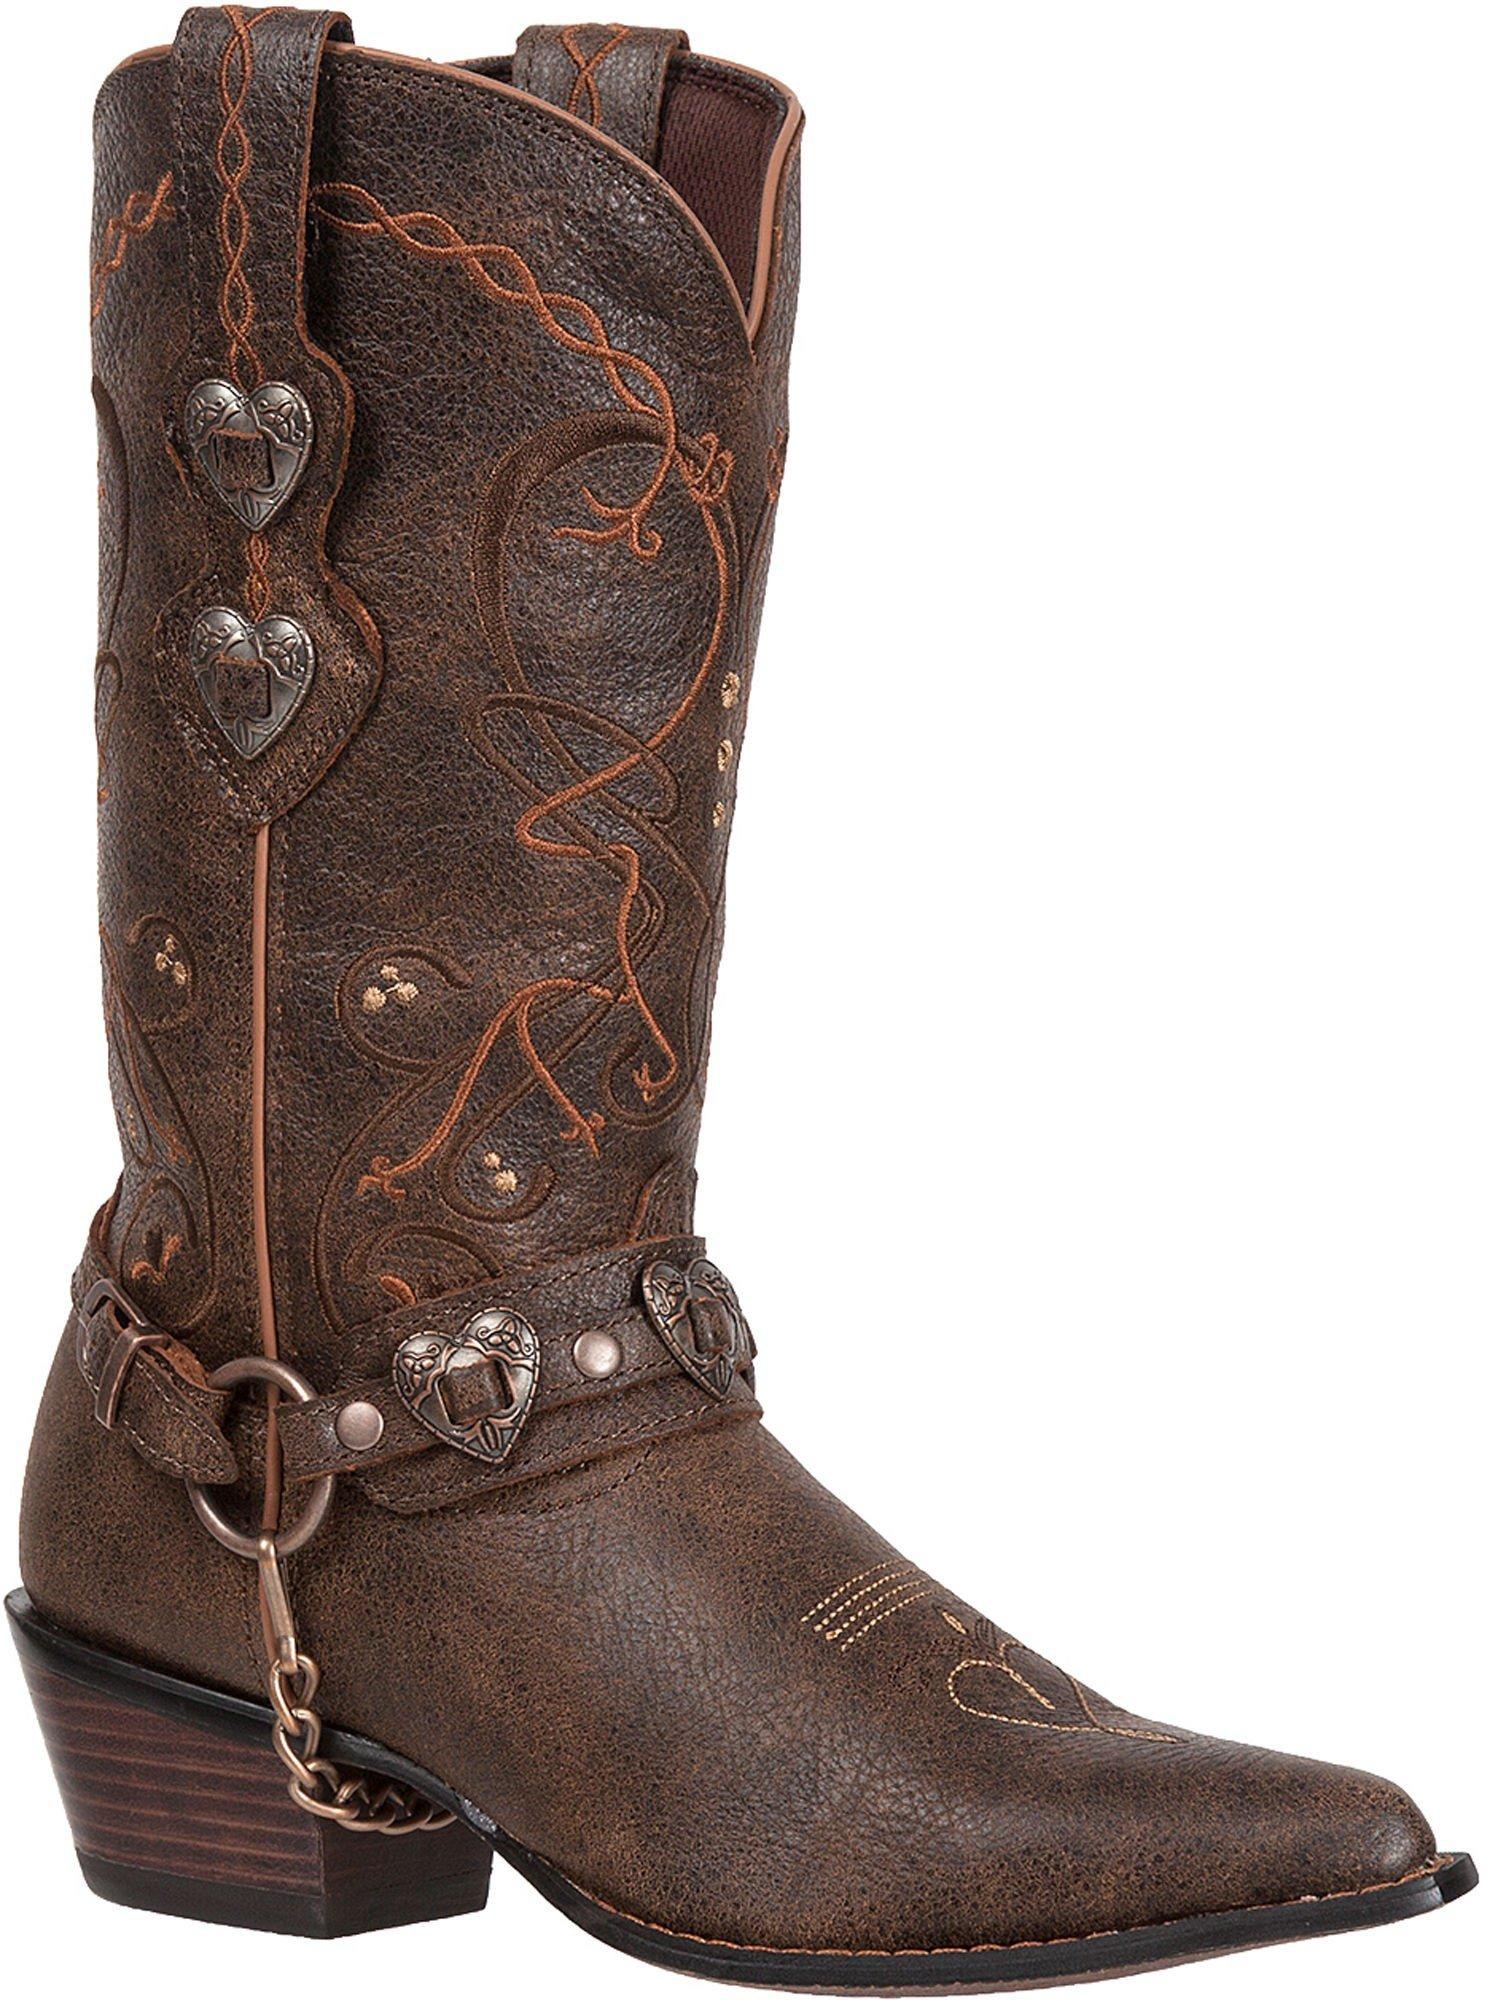 Womens Genuine Leather Heart Buckle Cowboy Boots